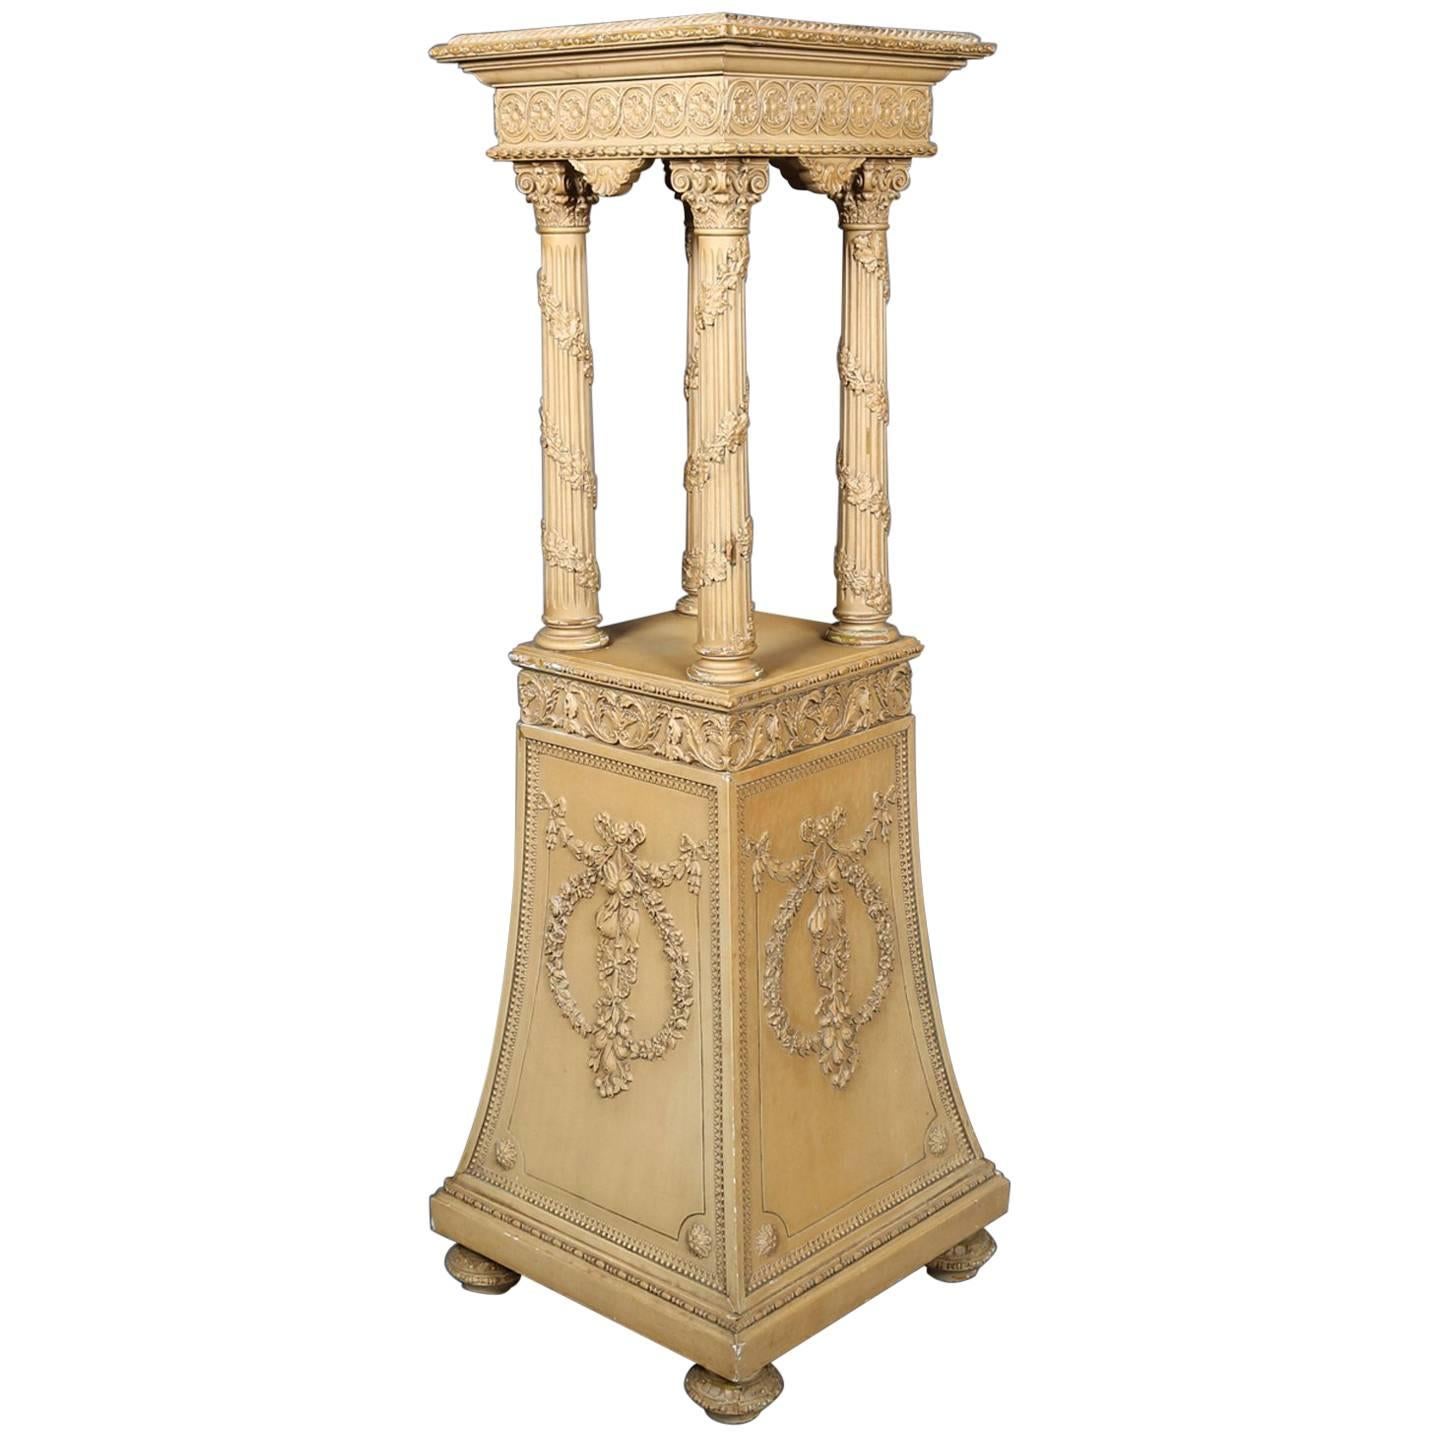 Antique French Louis XV Style Carved Wood & Gesso Sculpture Pedestal, circa 1900